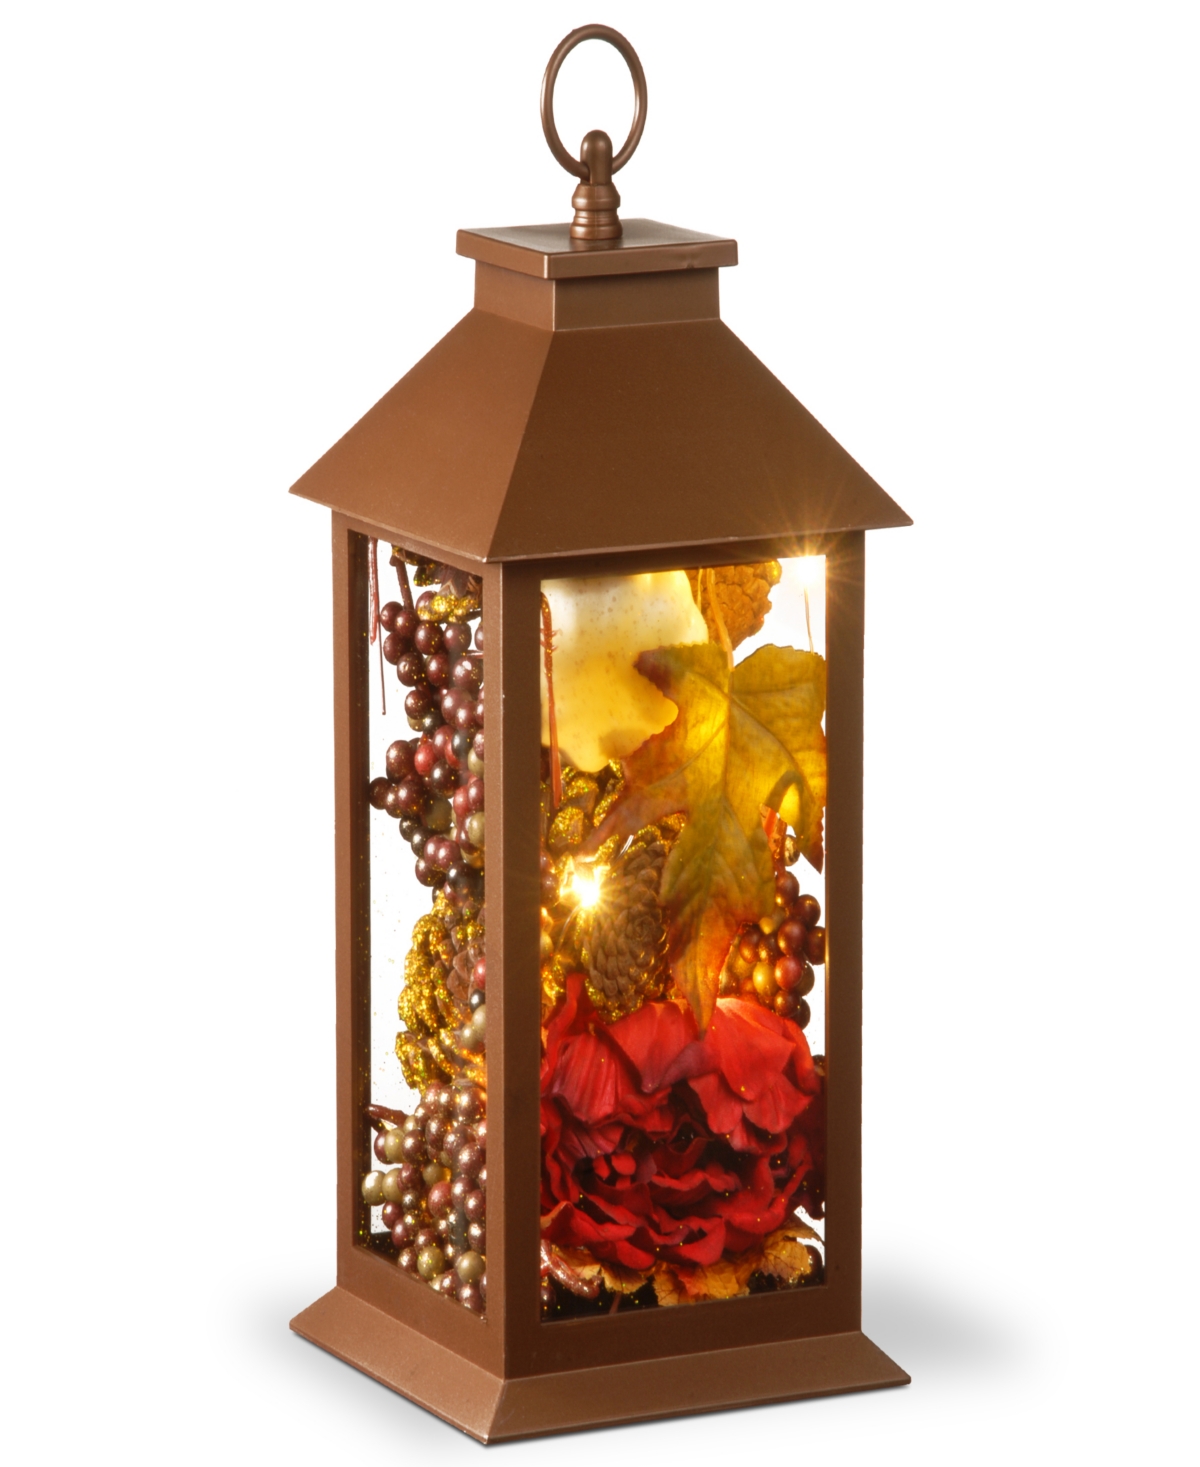 12" Harvest Lantern with Led Lights, Filled with Pumpkins, Leaves, Flowers, Berry Clusters, 12 inches - Brown